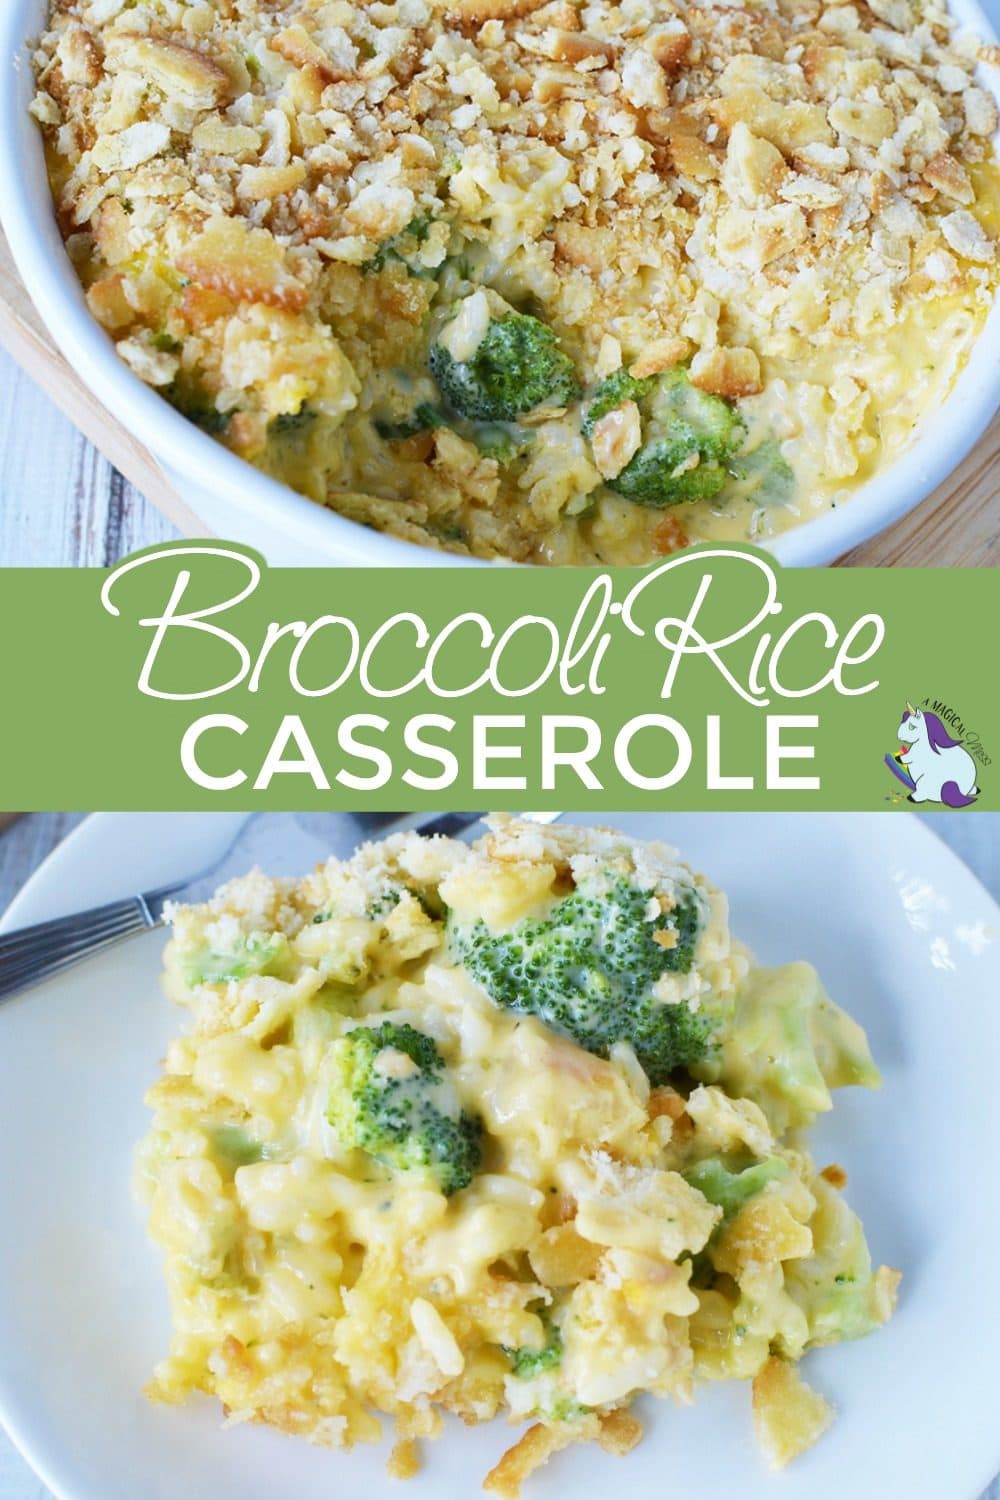 Broccoli rice casserole side dish topped with Ritz Crackers